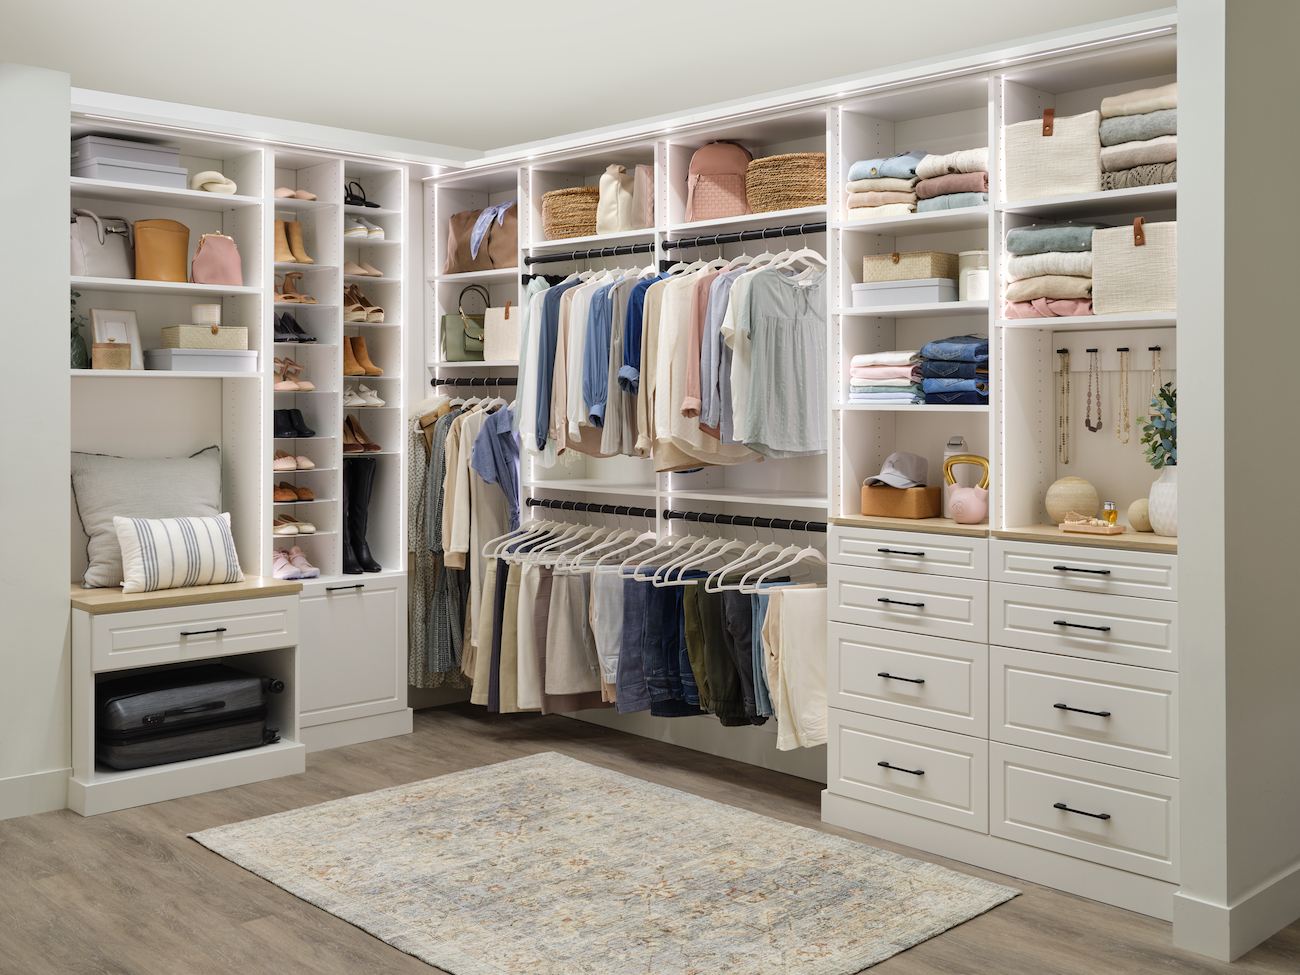 Ladies' walk-in closet with cream-colored shelving and cabinetry